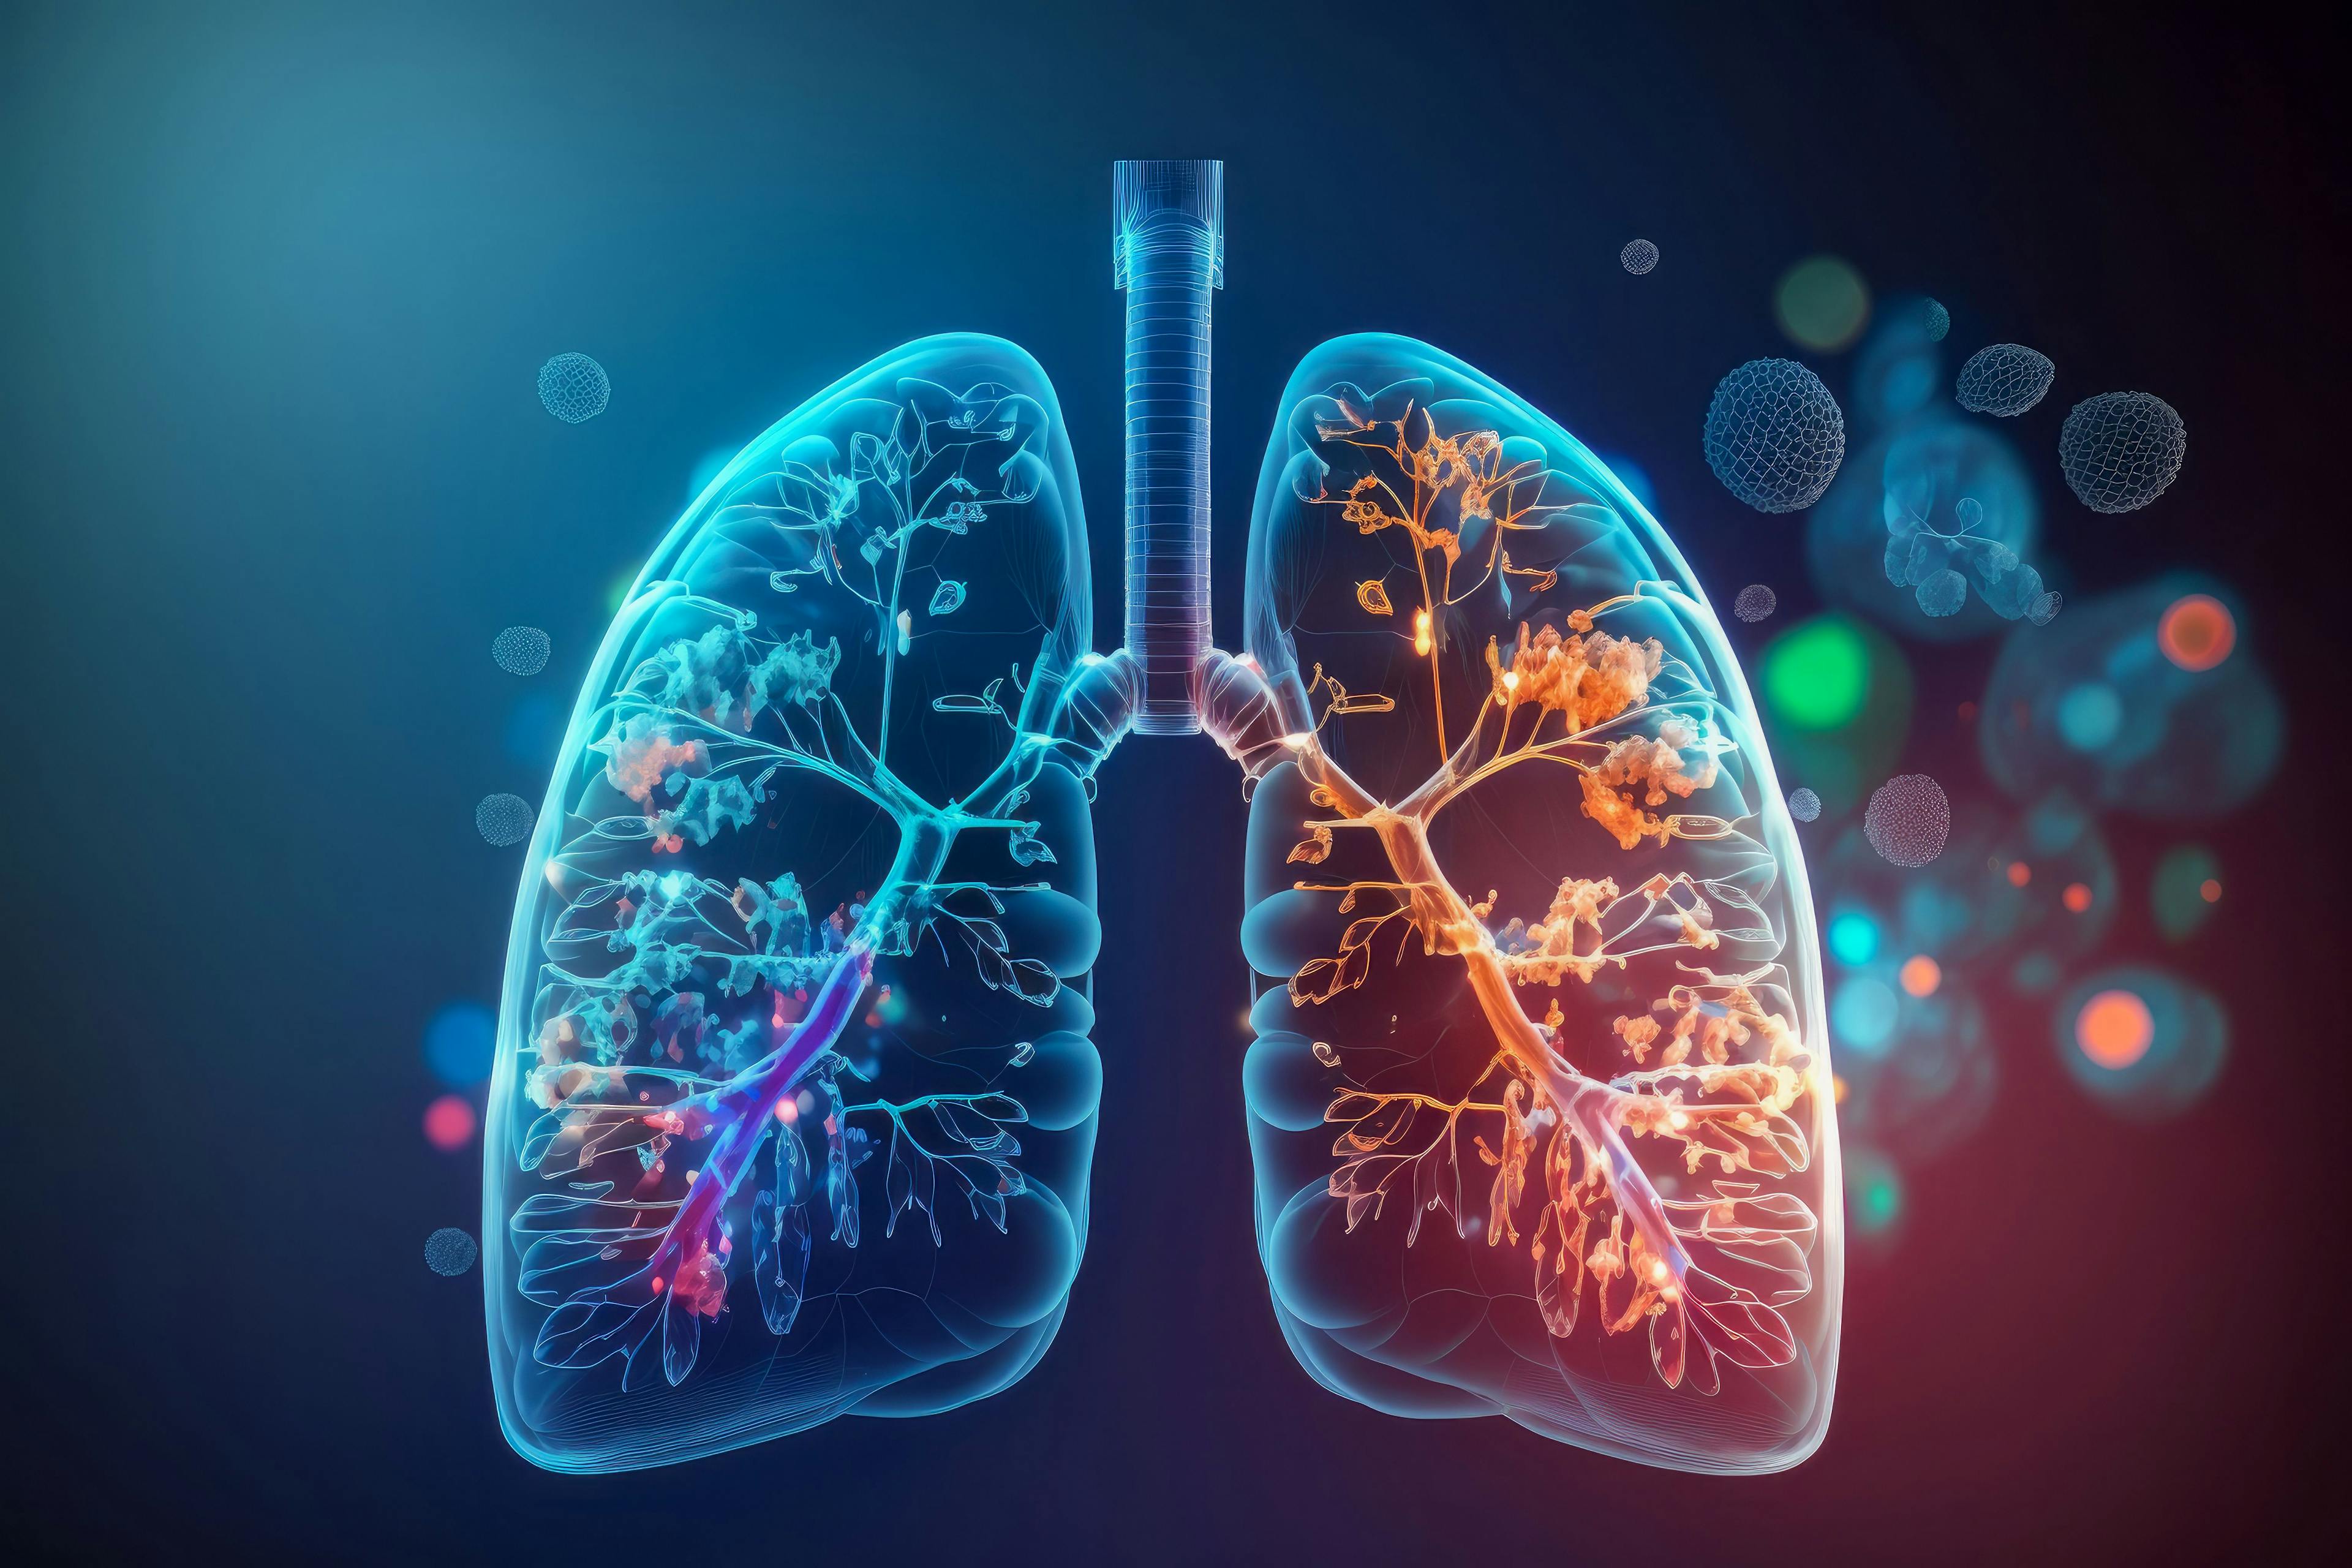 Human lungs x-ray. Abstract illustration. Health, Respiratory system health concept. Breathing. | Image Credit © Karrrtinki - stock-adobe.com